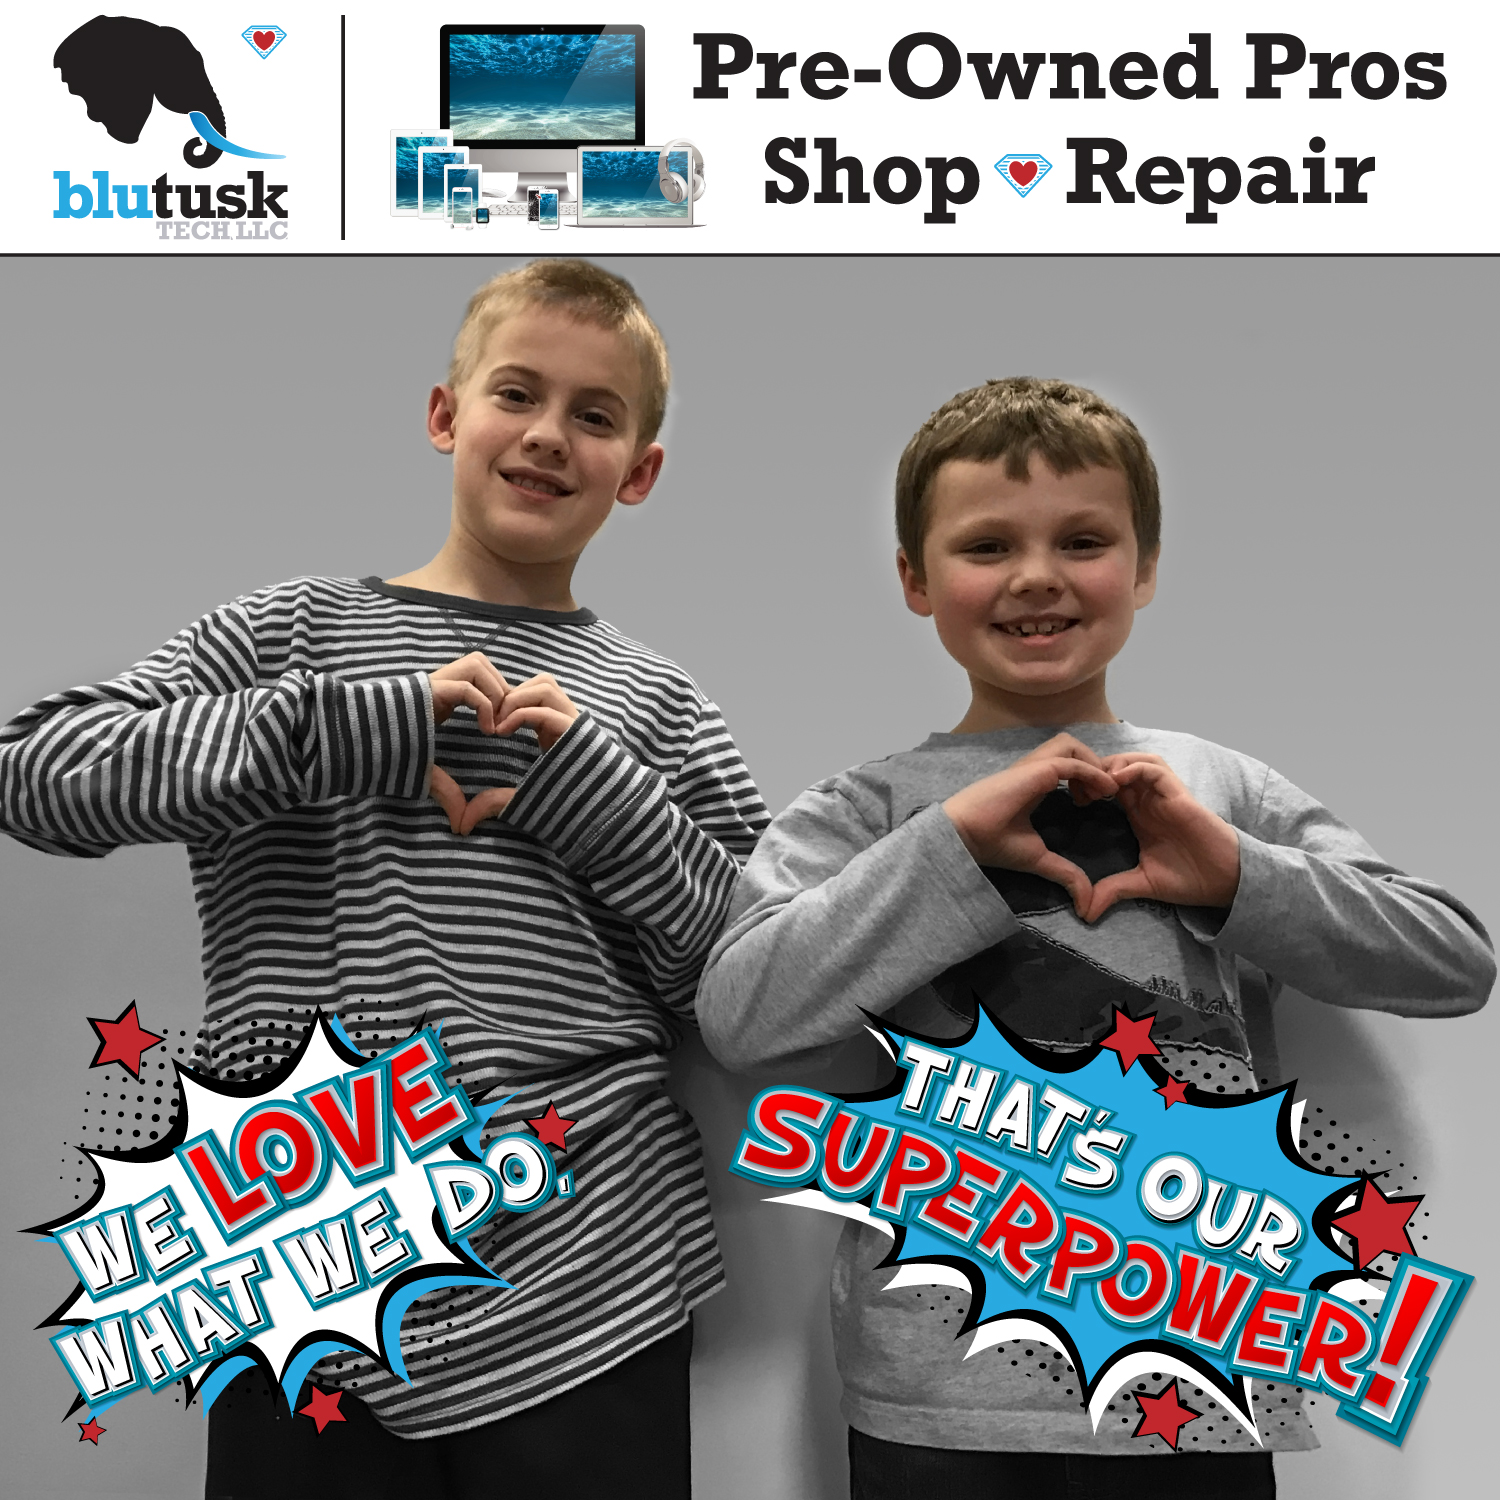 Number 1, We Love What We Do, from the top 10 reasons to shop with The Pre-Owned Pros at Blutusk Tech, LLC 